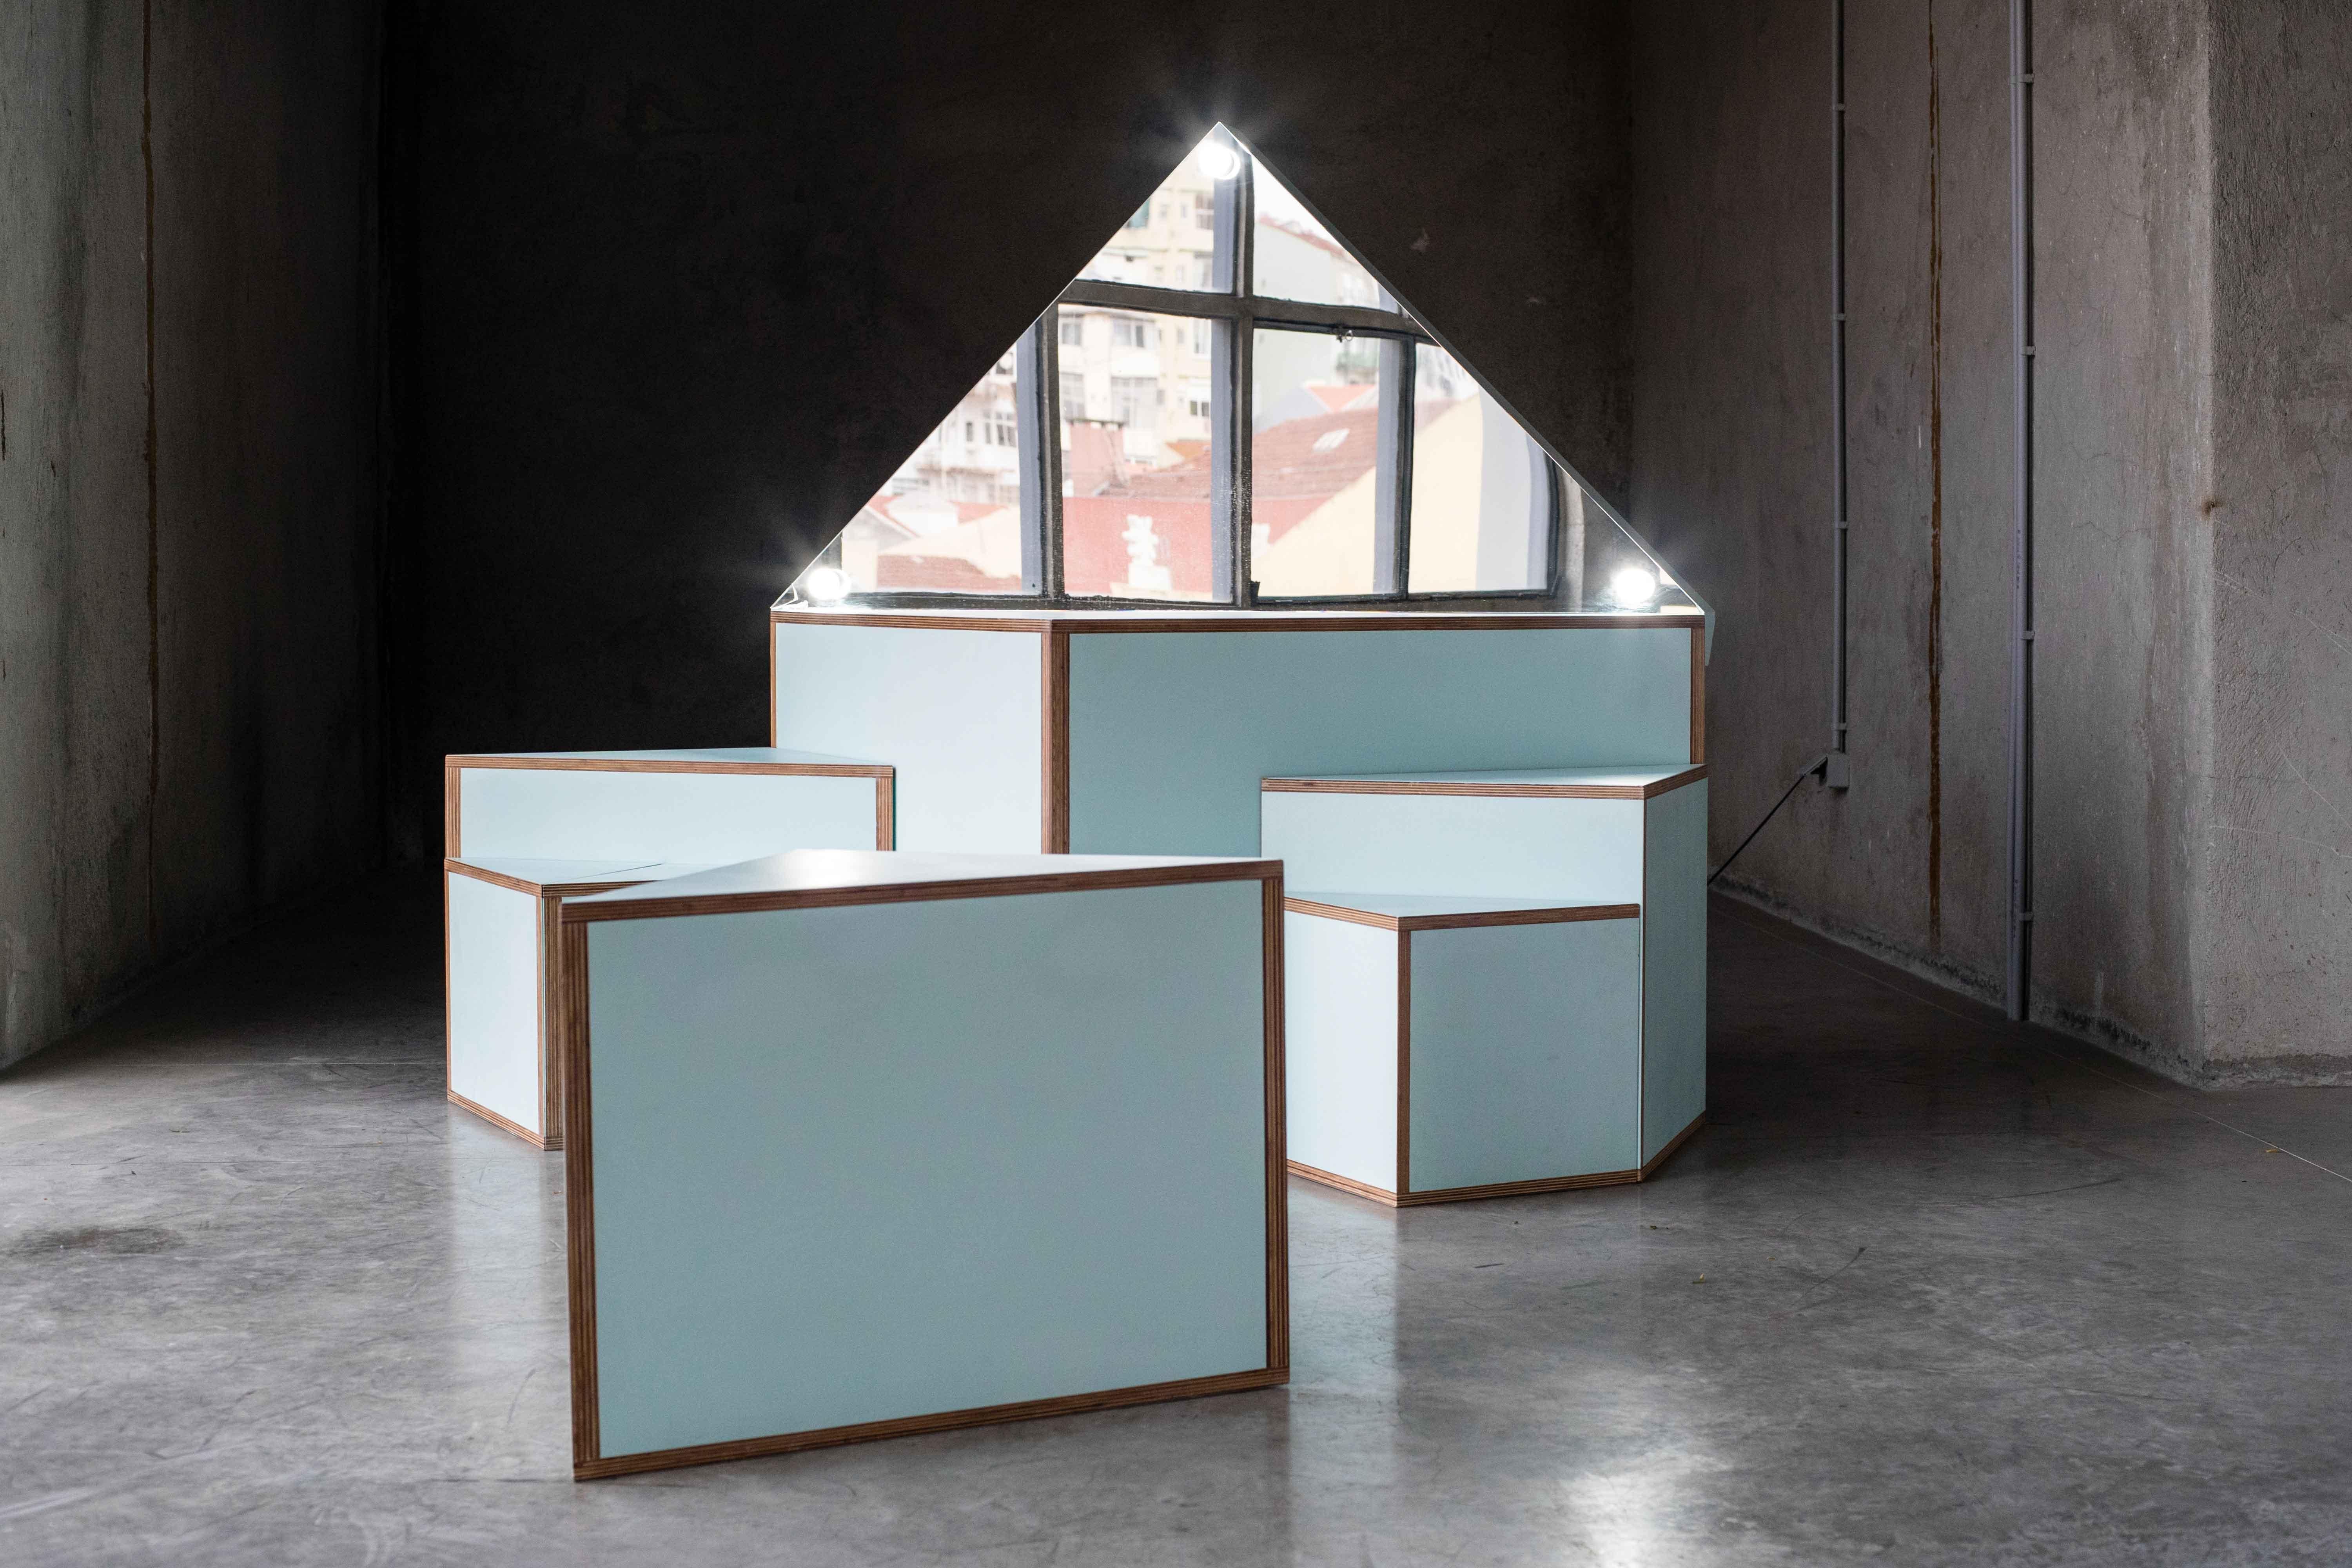 Isla dressing table by MOB 
Limited editions of 5 + 1 prototype
Designer: Ivan Navaro and Courtney Smith (USA)
Dimensions: H 154 x D 76 x W 154cm
Material: Birch plywood, mirror, white coated light bulb

This sculpture is a dressing